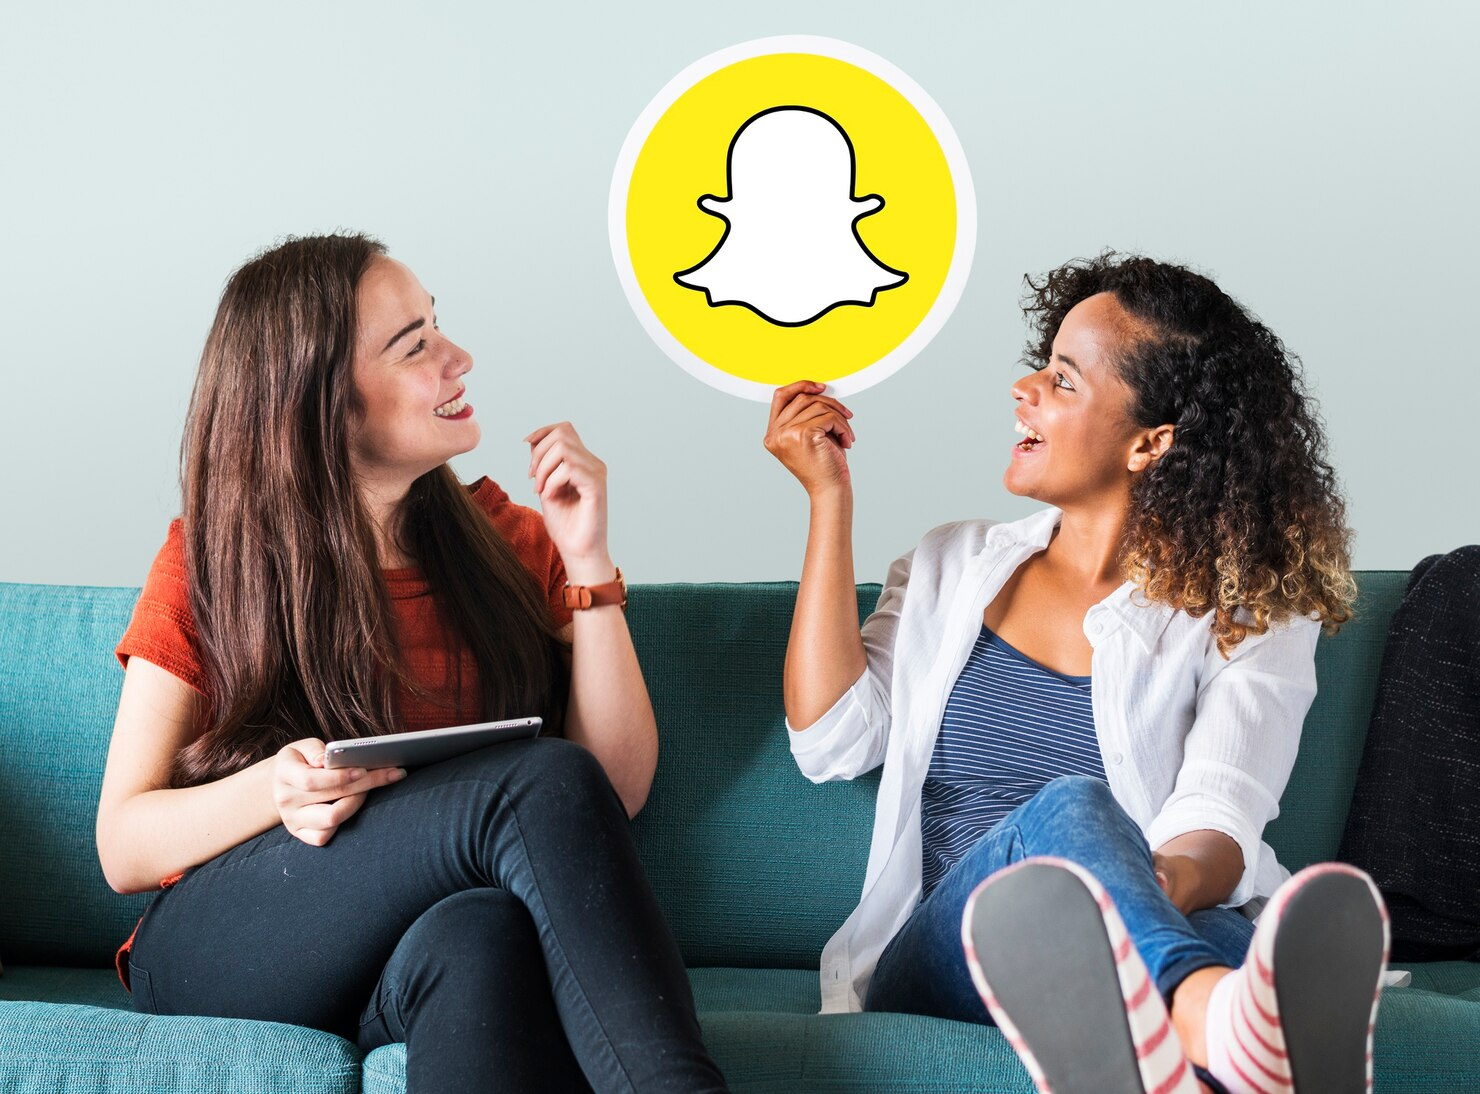 Two women laughing while discussing good captions for snapchat and holding a Snapchat icon.